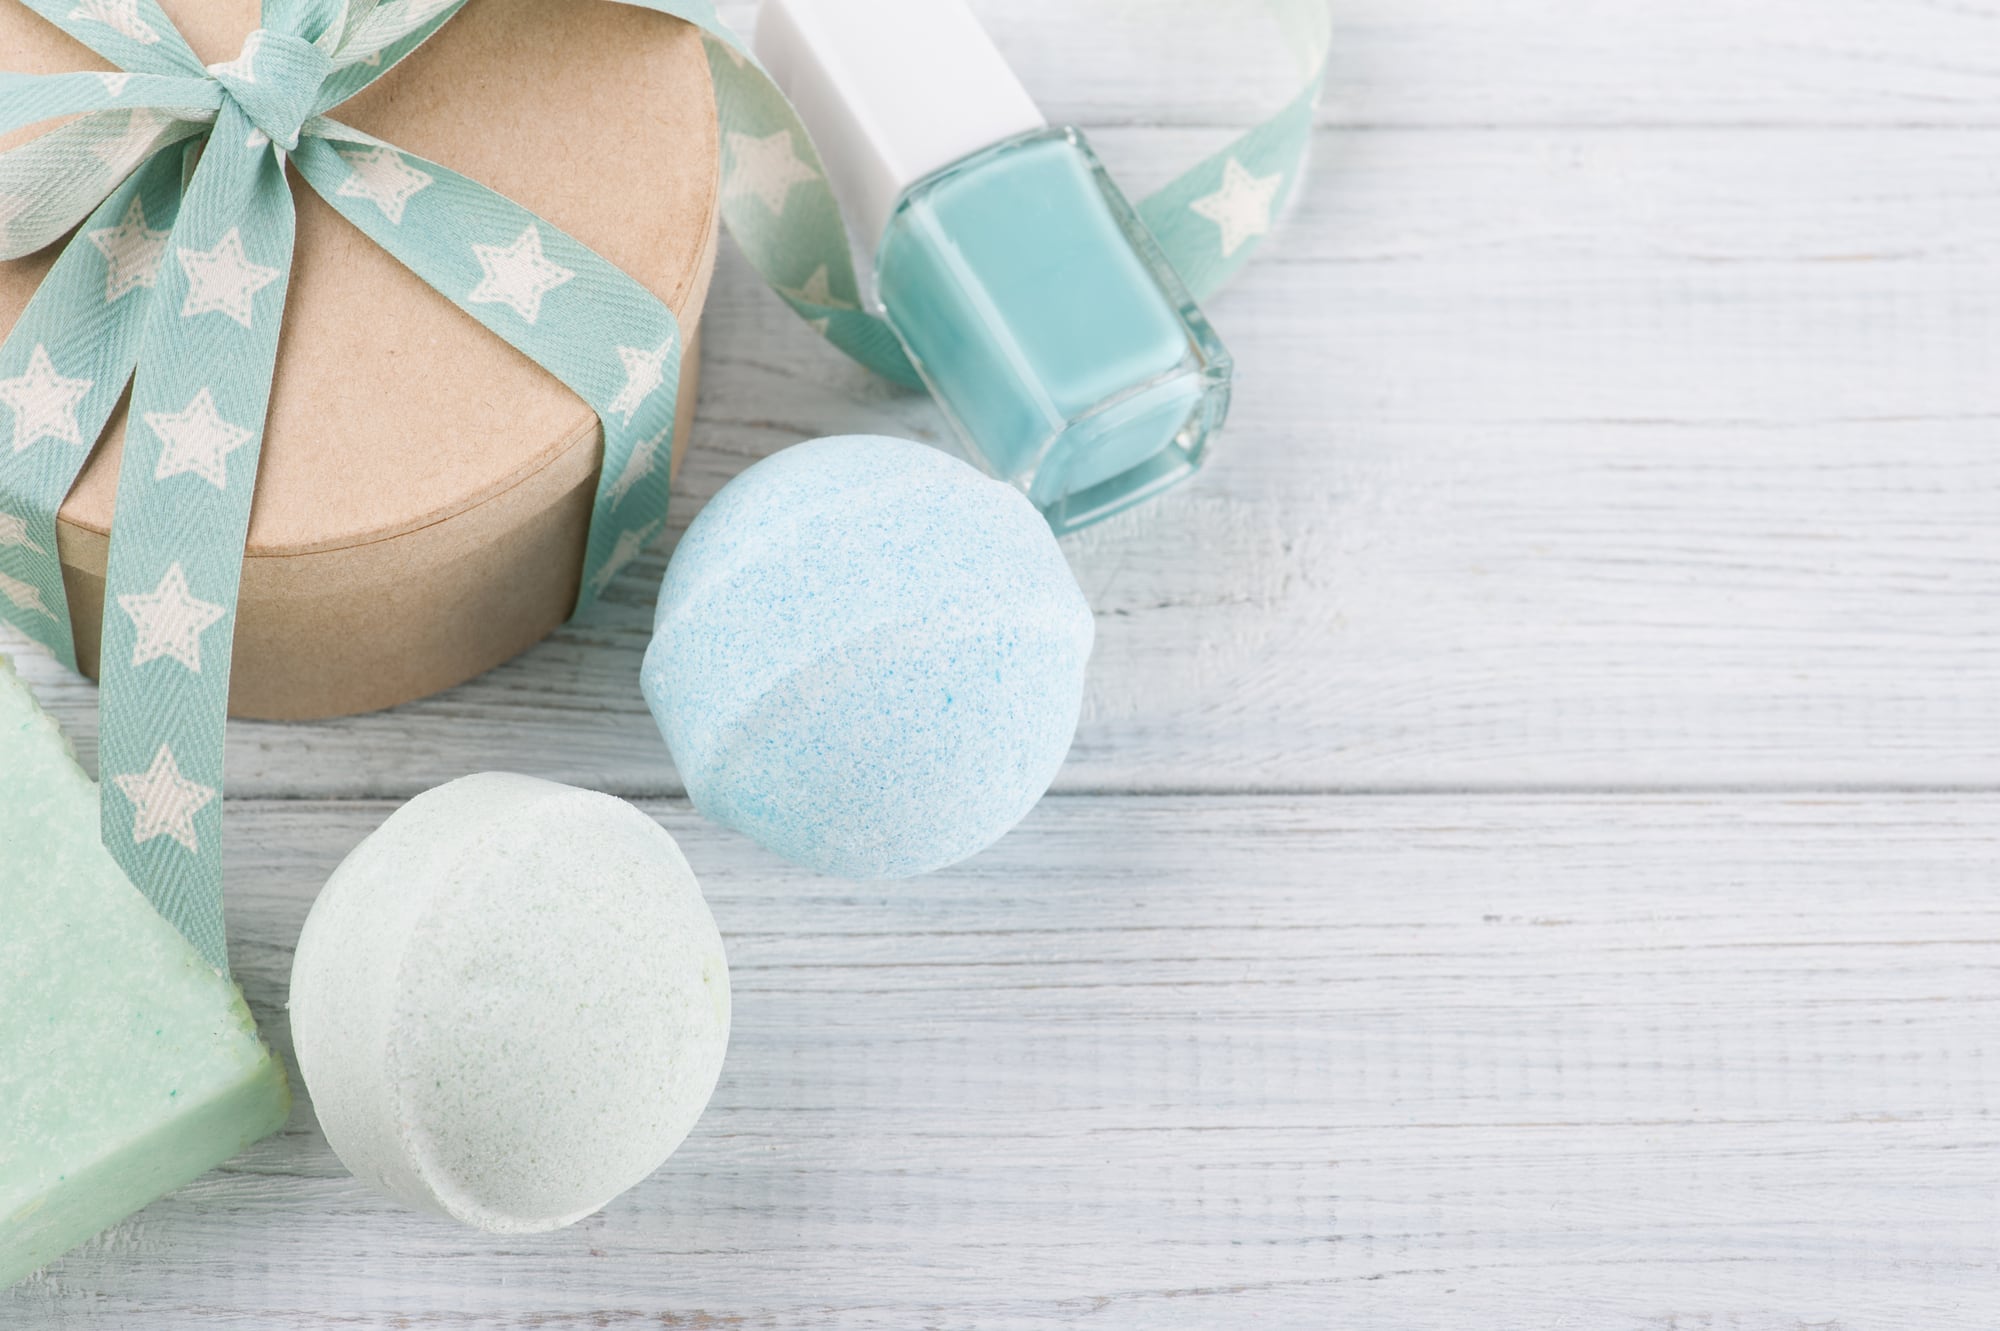 What's The Best Bath Bomb Recipe For Sensitive Skin?